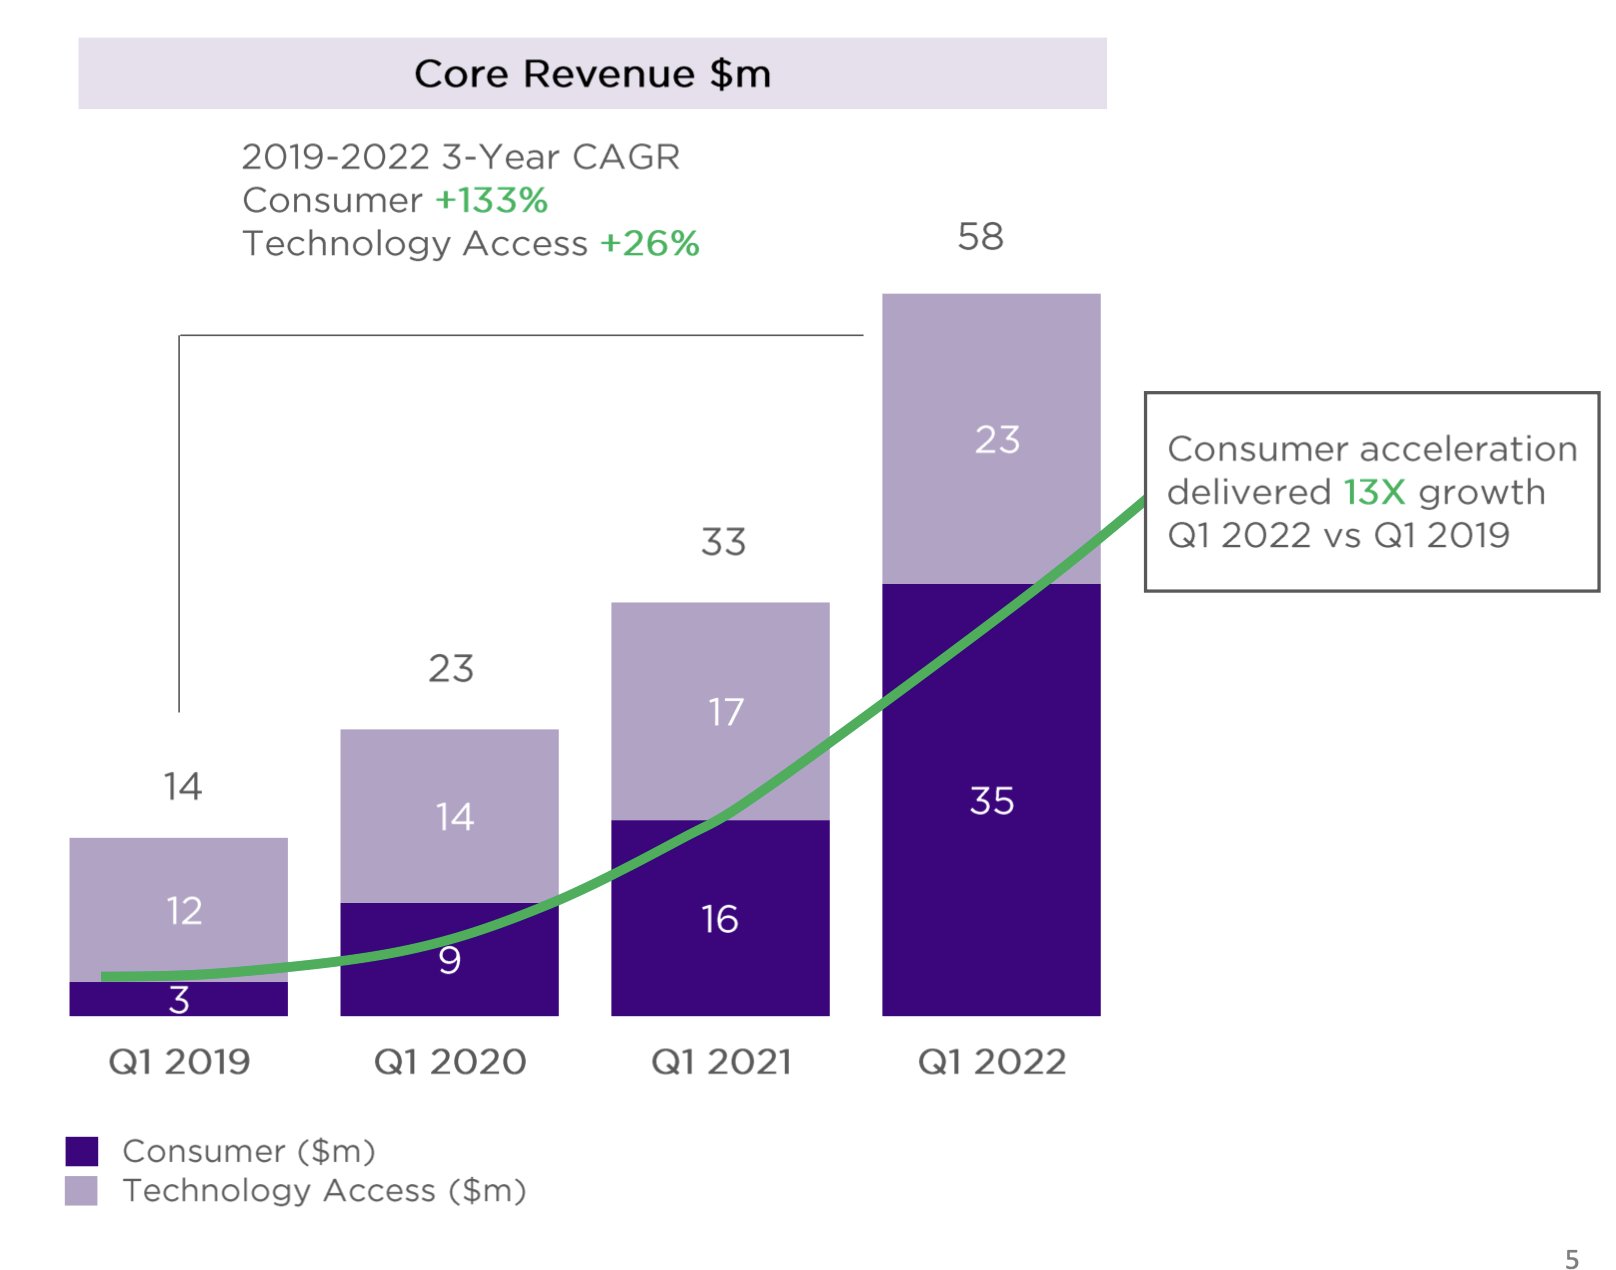 Image shows Amyris's revenue growth led by consumer brands, growing at 133% CAGR from $3M in Q1 2019 to $35M in Q1 2022